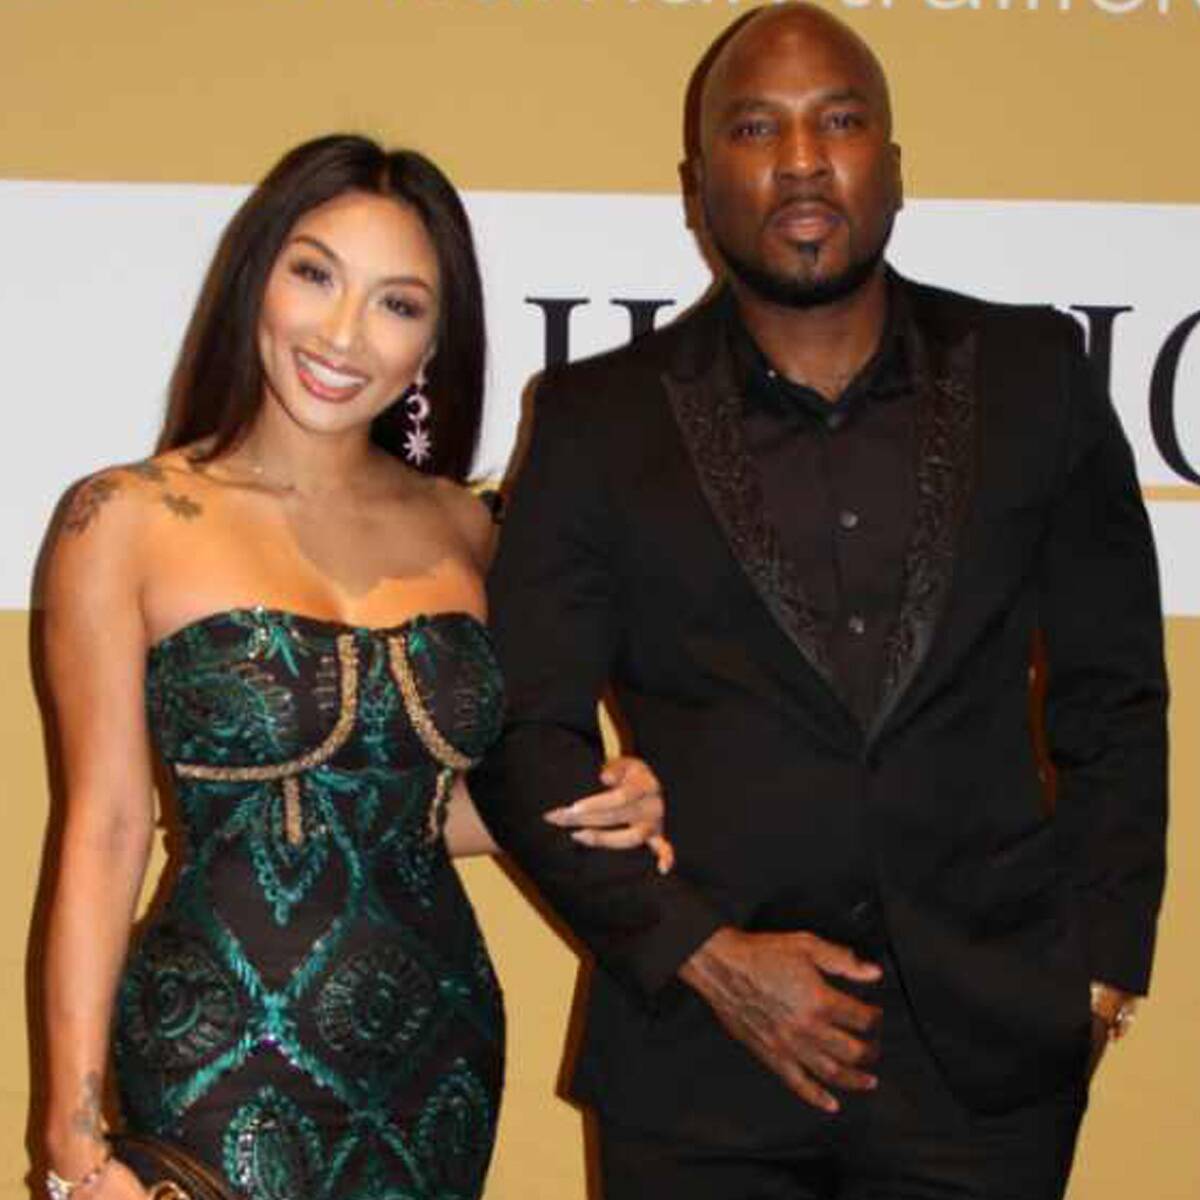 Jeezy Calls the 3 Weeks Fiancée Jeannie Mai Couldn’t Talk the "Most Peaceful Time of Quarantine"